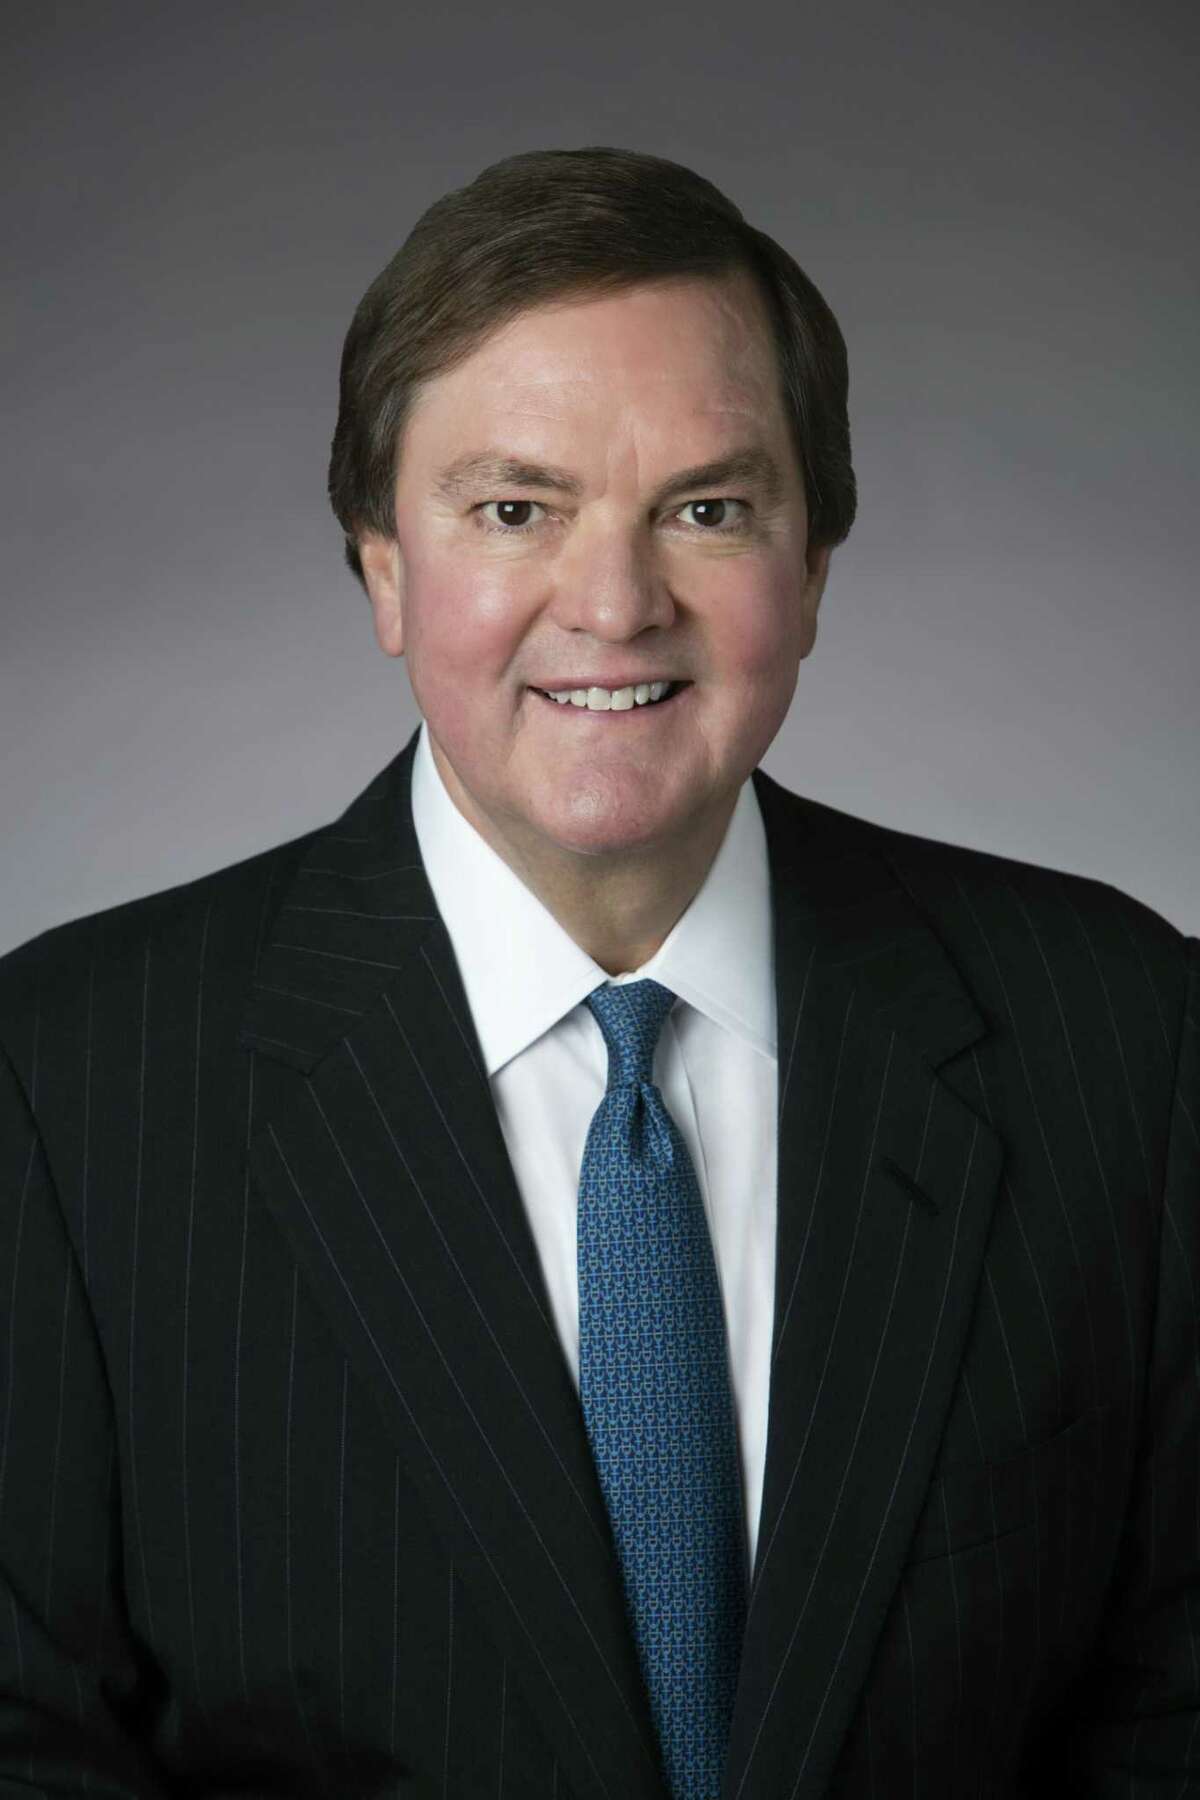 J. Bruce Bugg Jr. is the chairman of The Bank of Austin, the first bank to get a charter in Texas since June 2009.